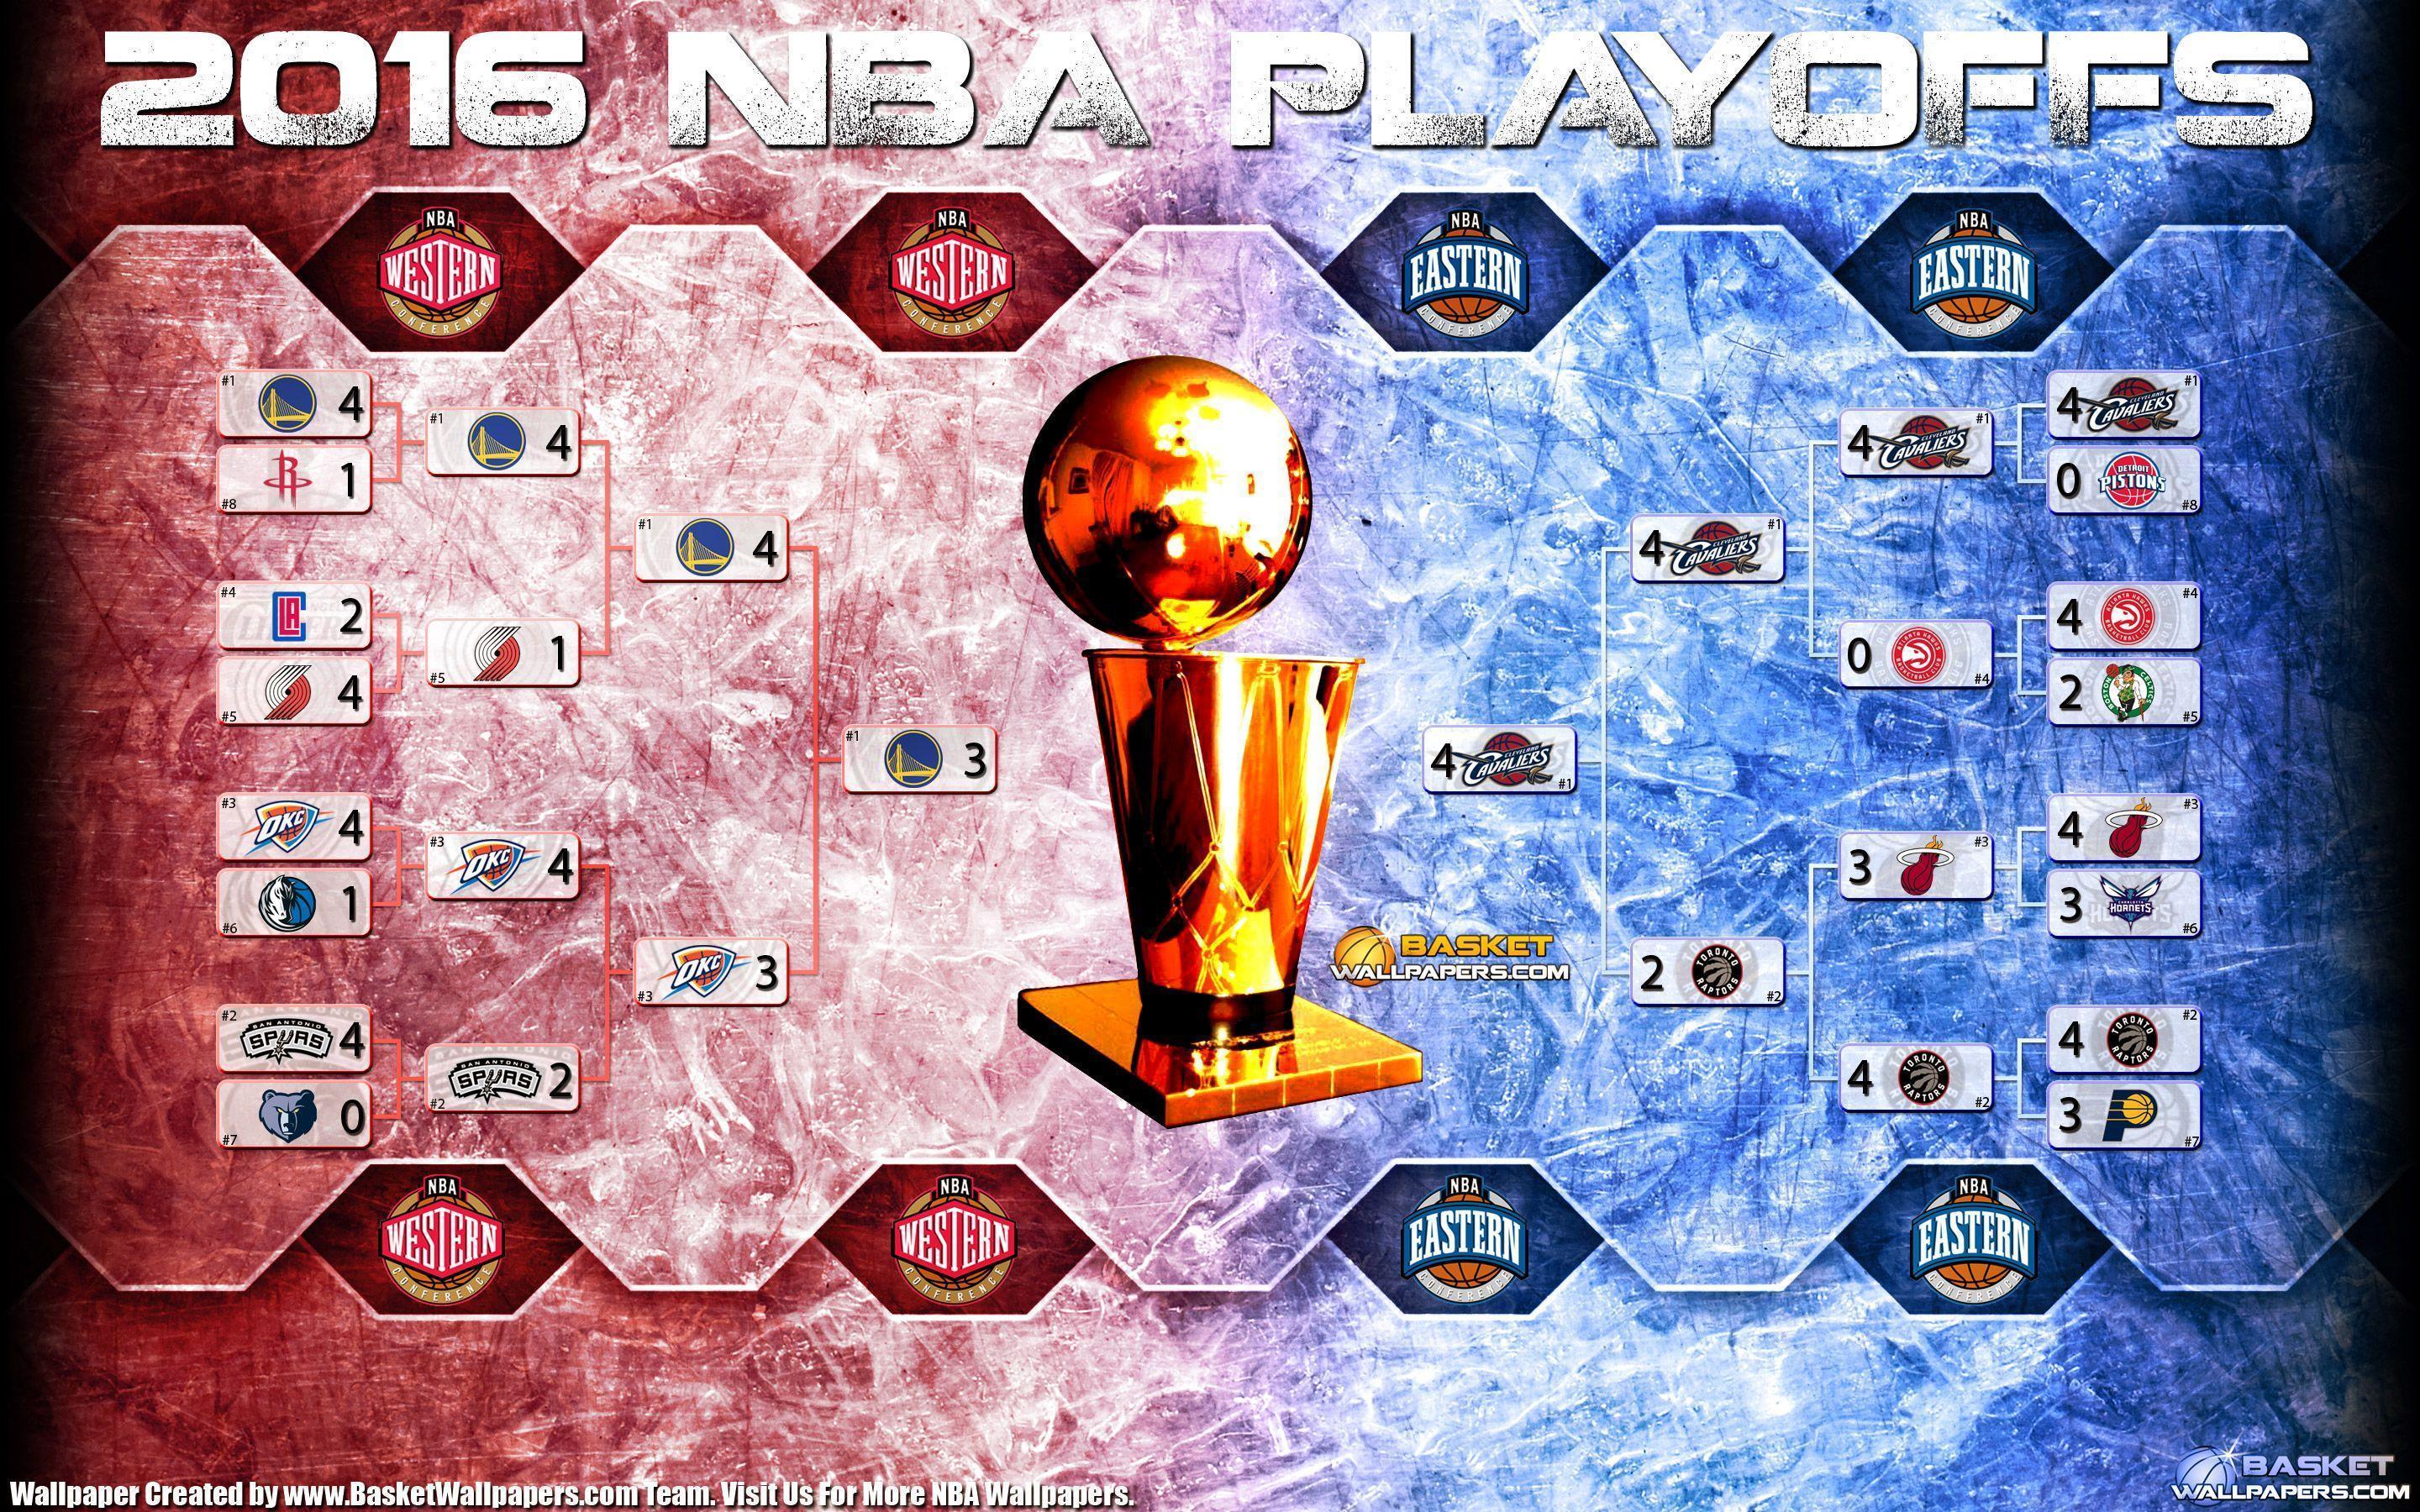 2013 nba western conference finals